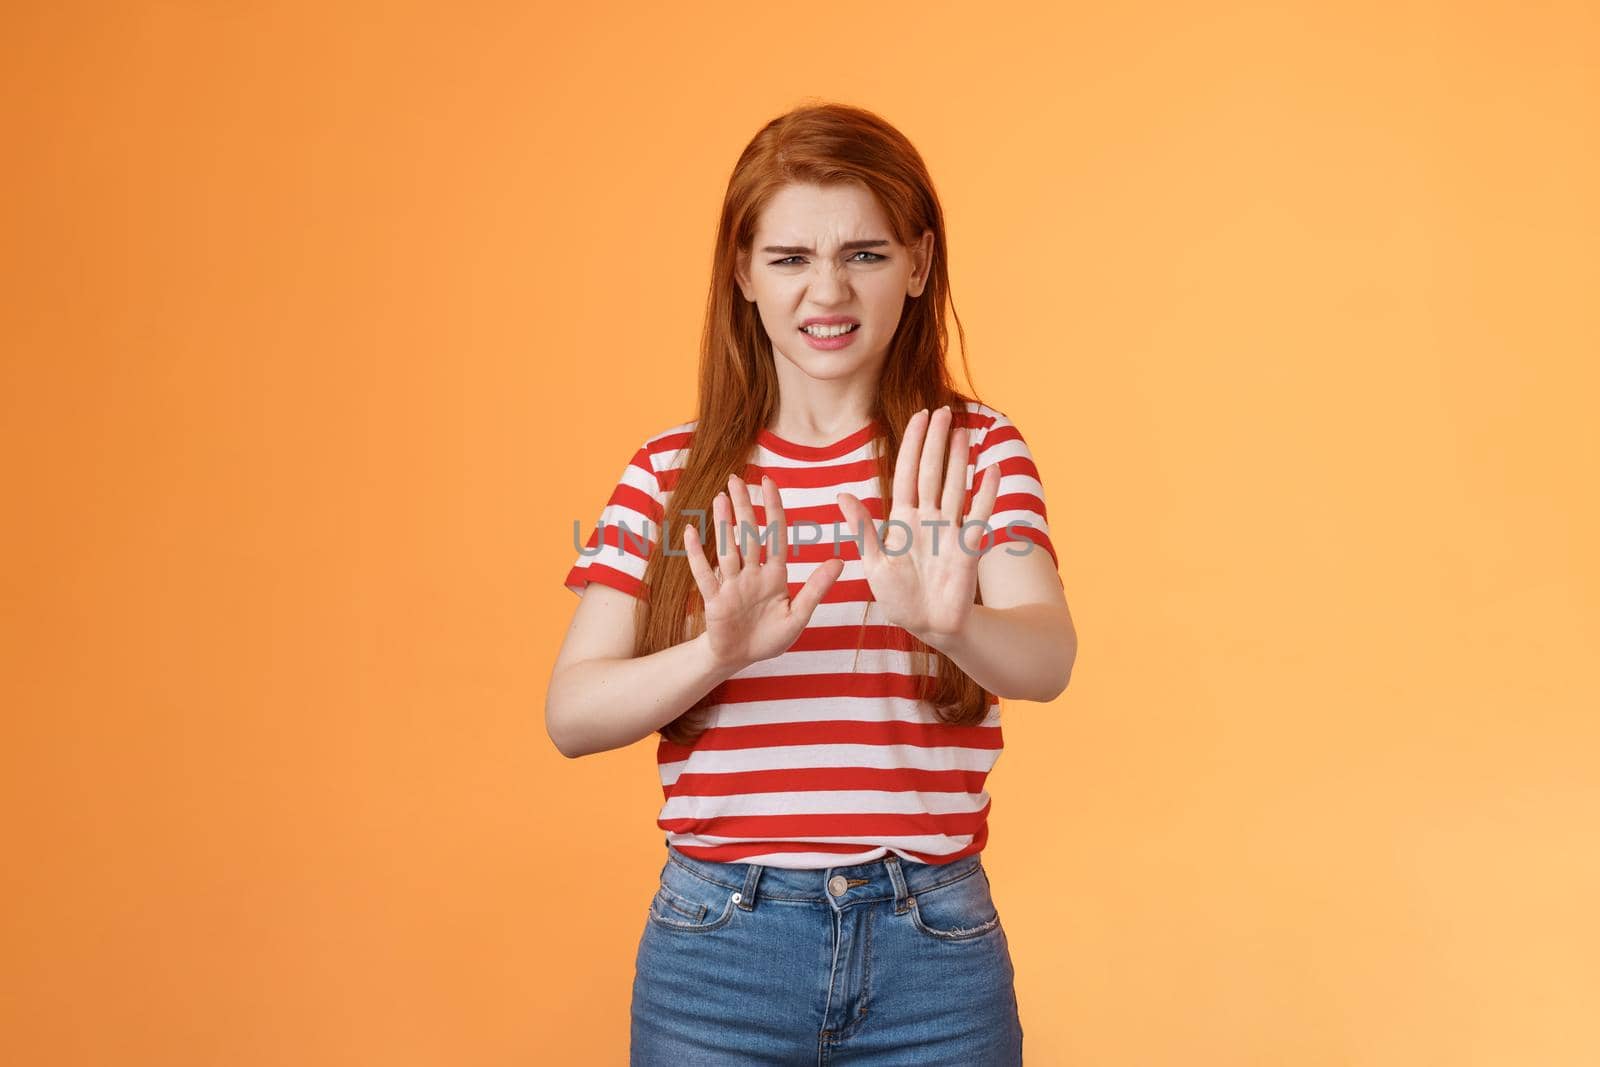 Gosh it stinks. Disgusted redhead picky woman blocking sign raise hands up defensive, grimacing, cringe from aversion awful smell, show refusal rejecting disgusting offer, stand orange background.